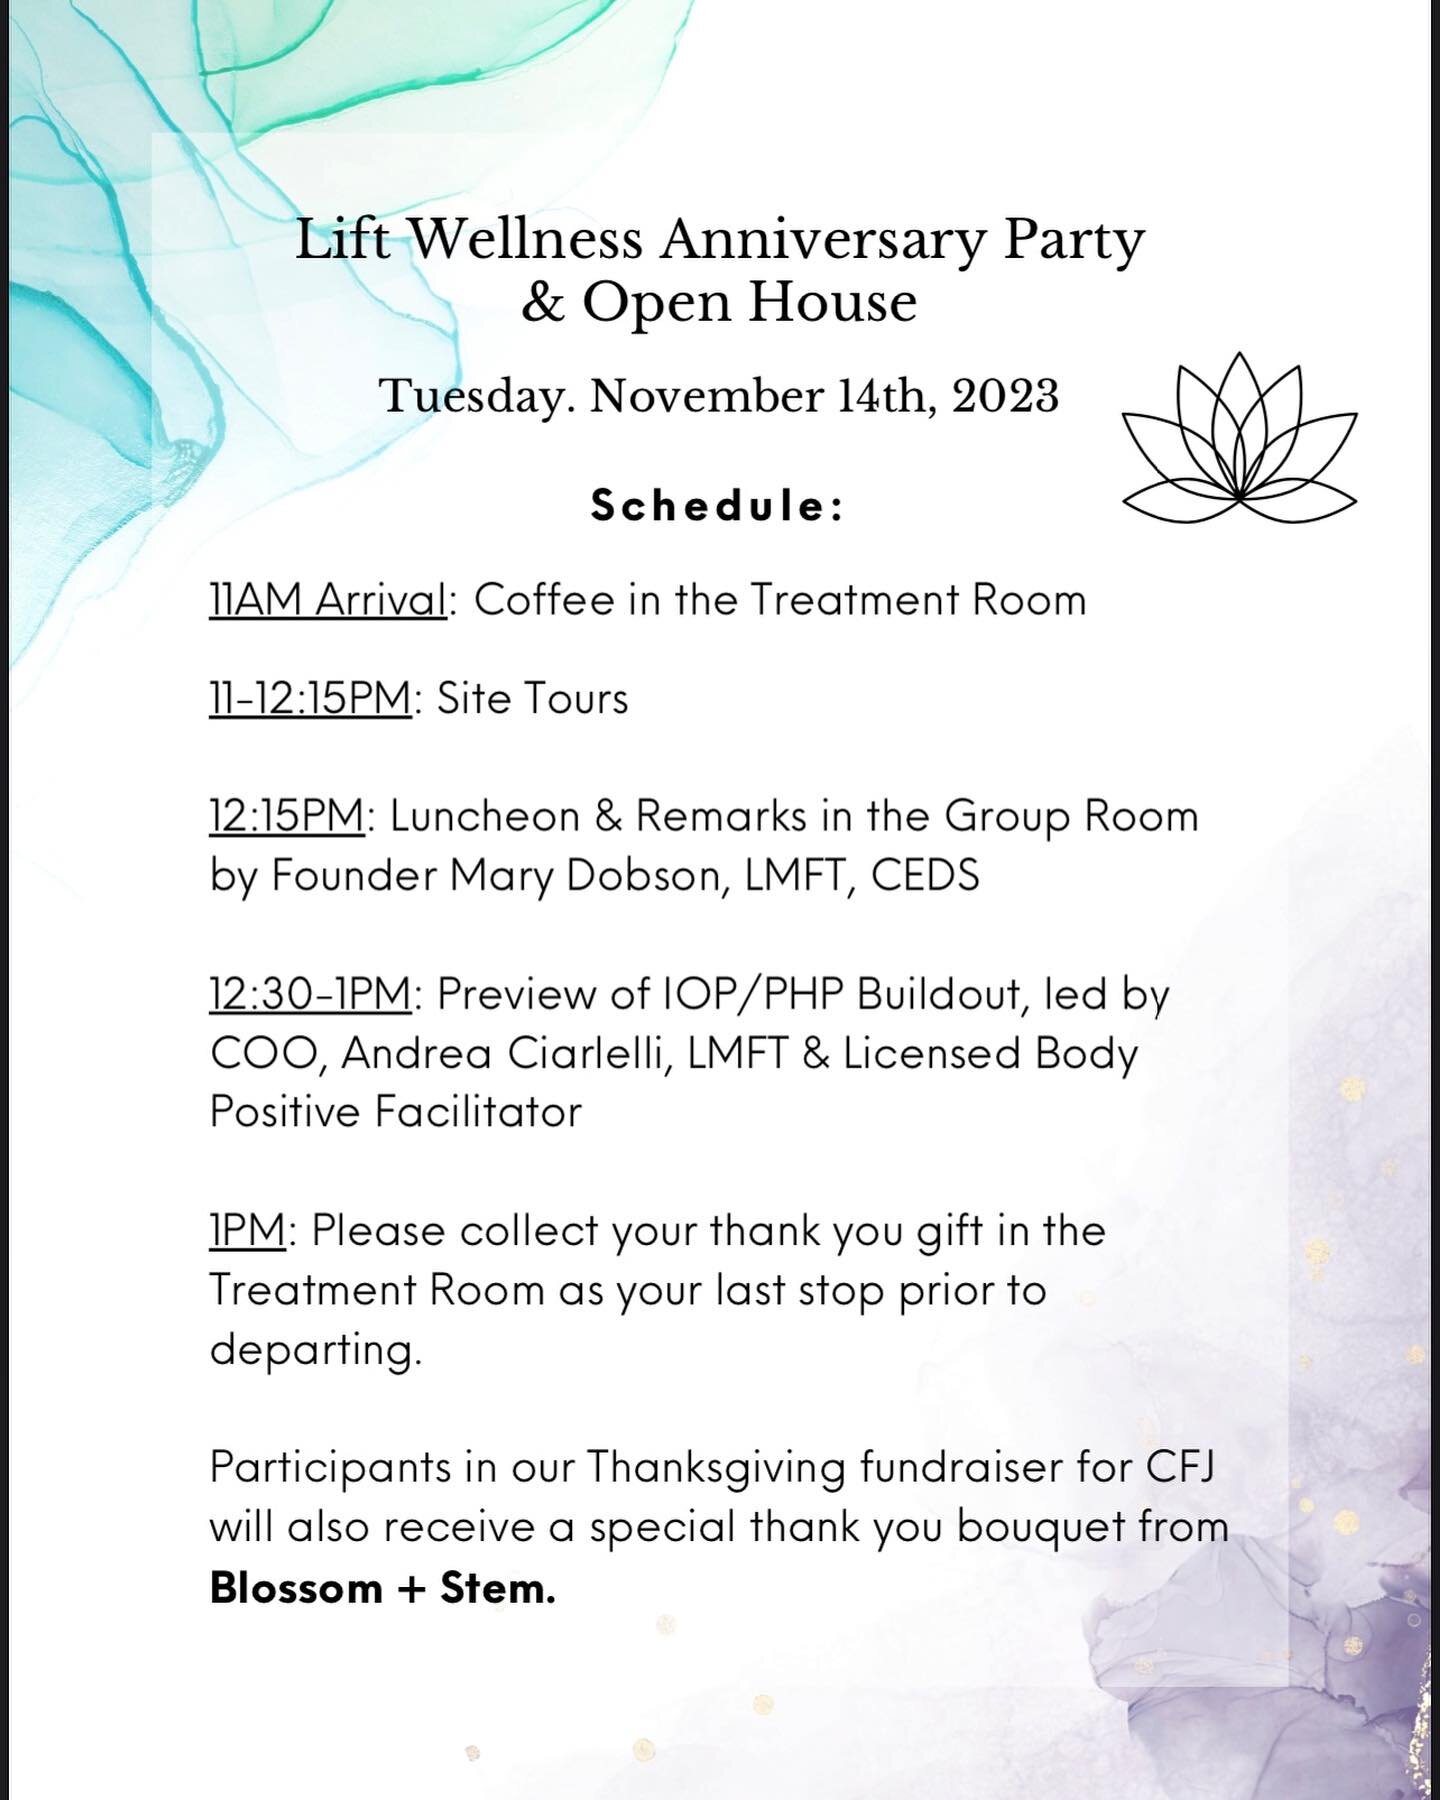 We will see you this Tuesday 11.14.23 at Westport campus at 11am for a special seventh anniversary celebration featuring bites by Southern Belle Bites @southernbellebitesllc and Palmer&rsquo;s Market @palmersmarket, facility site tours, clinician mee